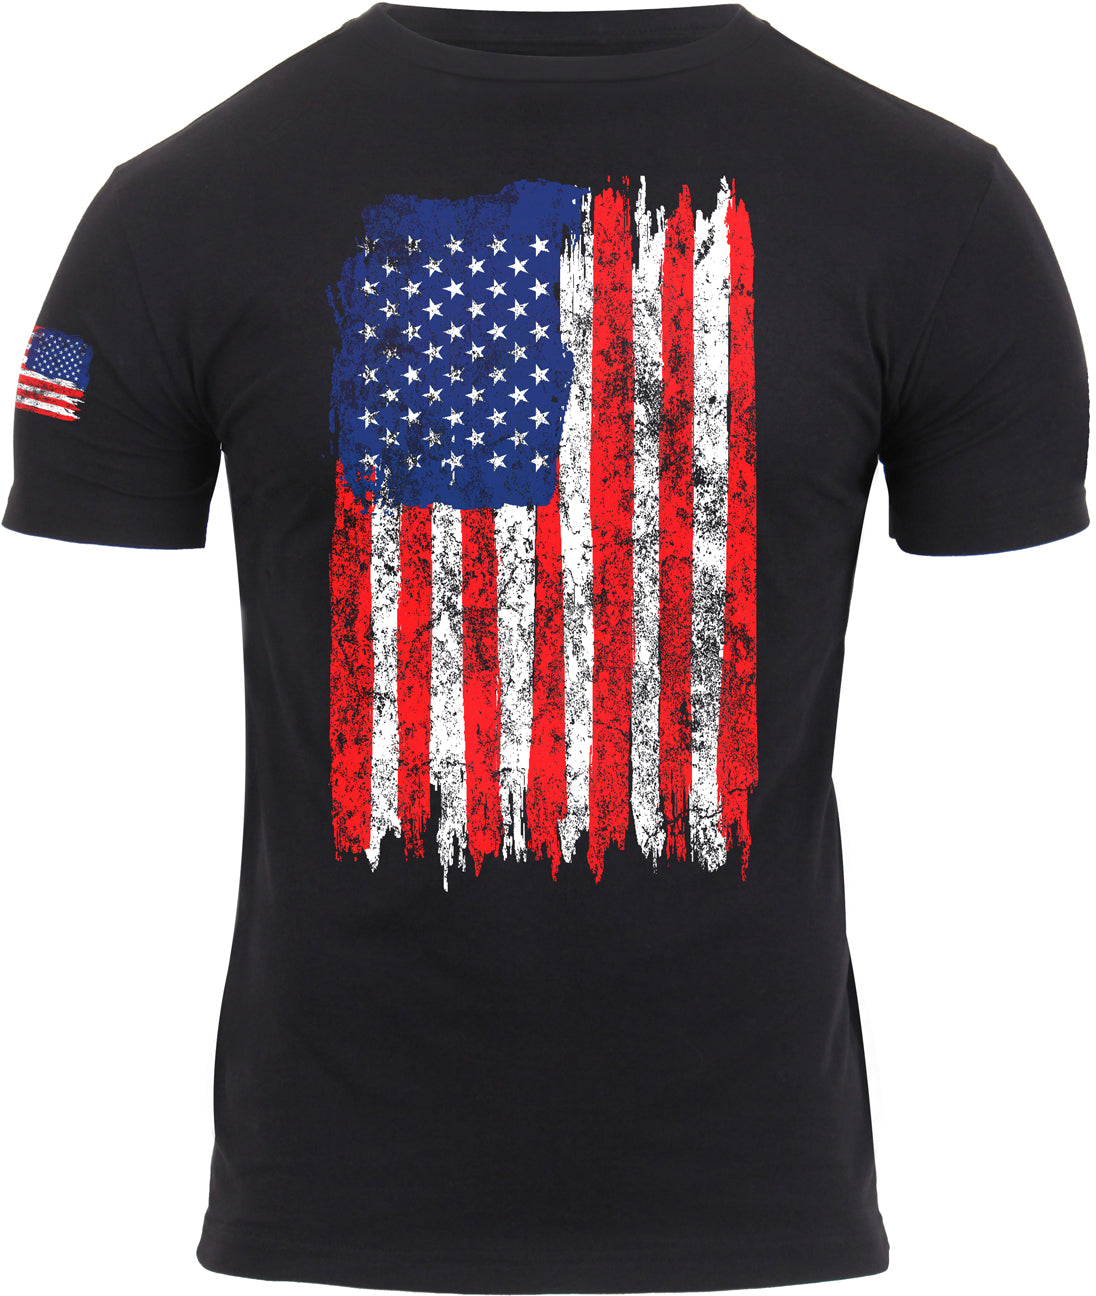 Red / White / Blue Distressed US Flag Athletic Fit T-Shirt